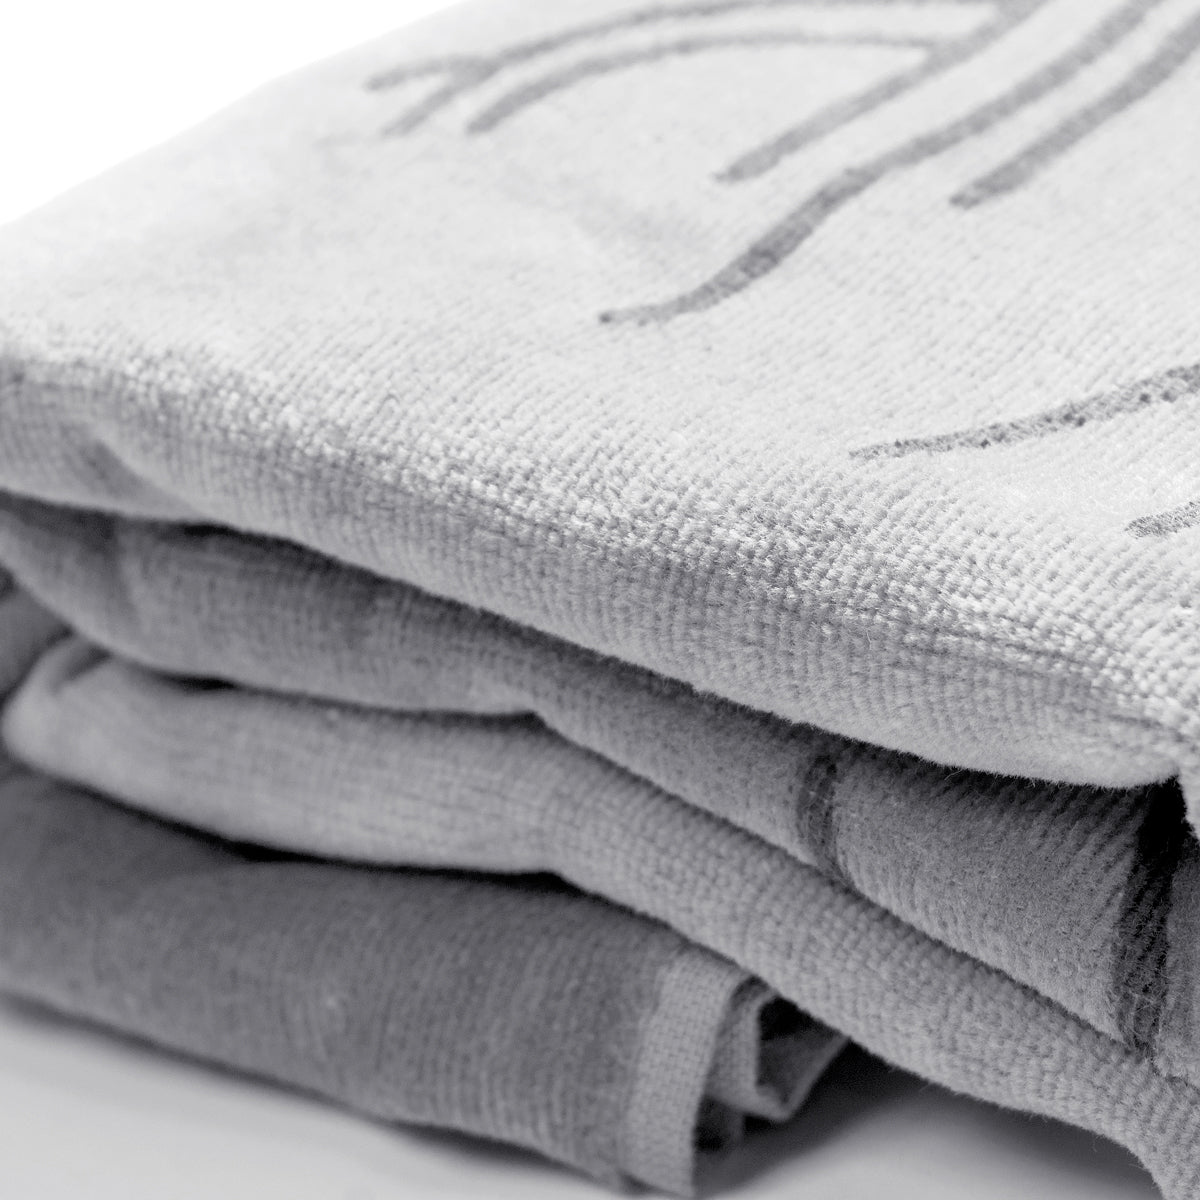 Very detailed close up of a folded oversized silver-grey beach towel.